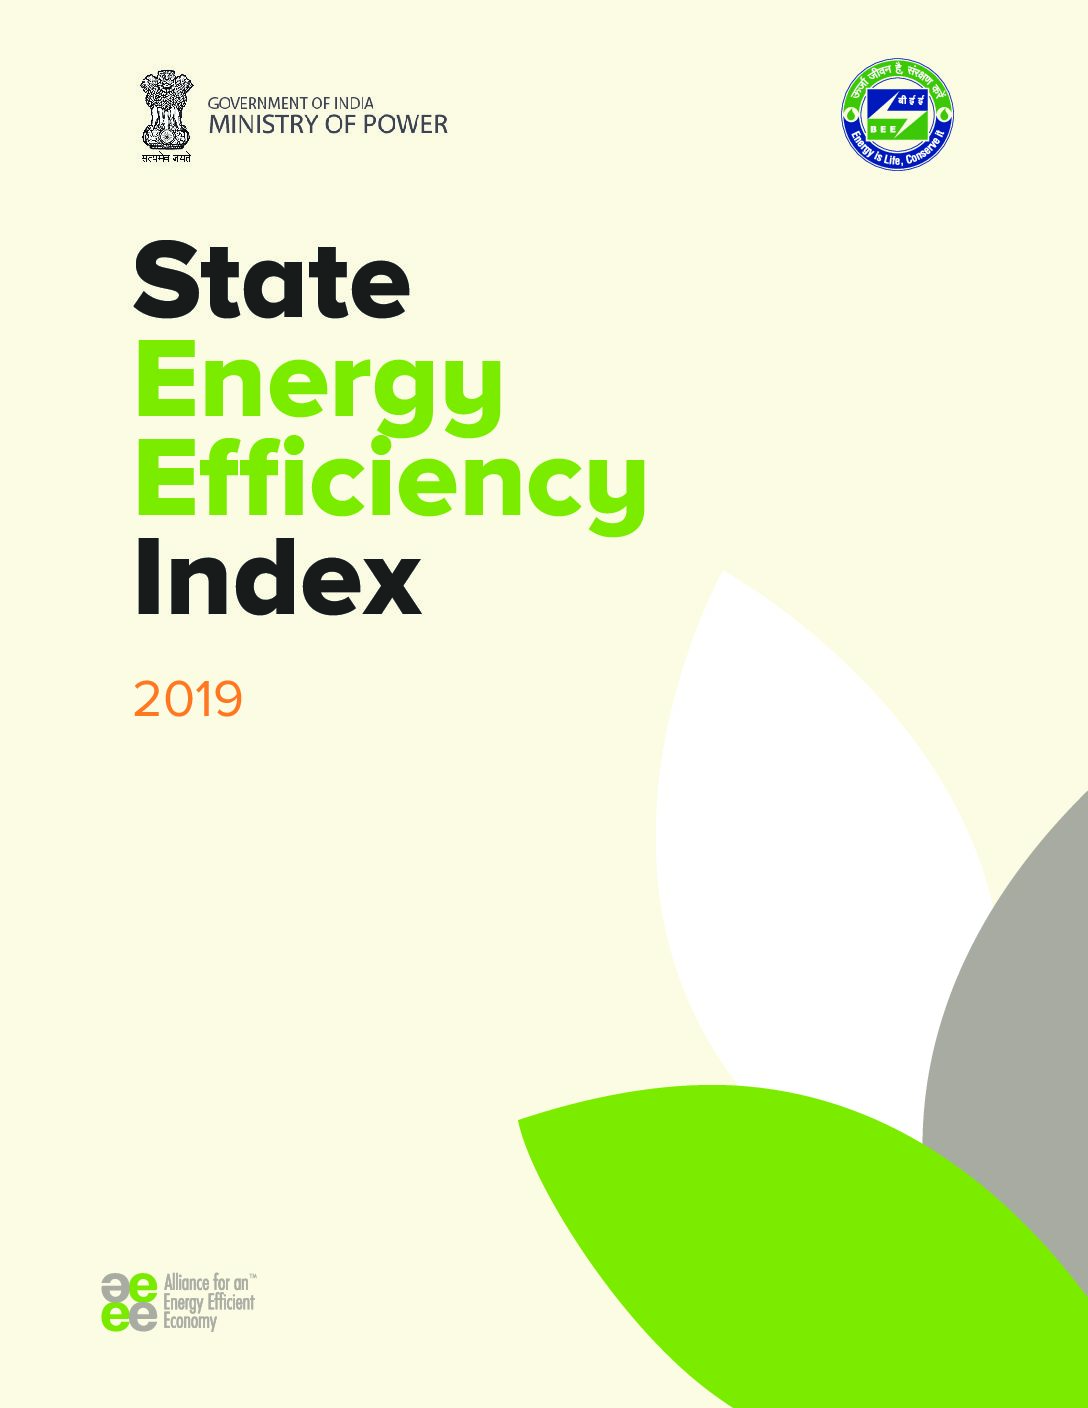 state-energy-efficiency-index-2019-alliance-for-an-energy-efficient